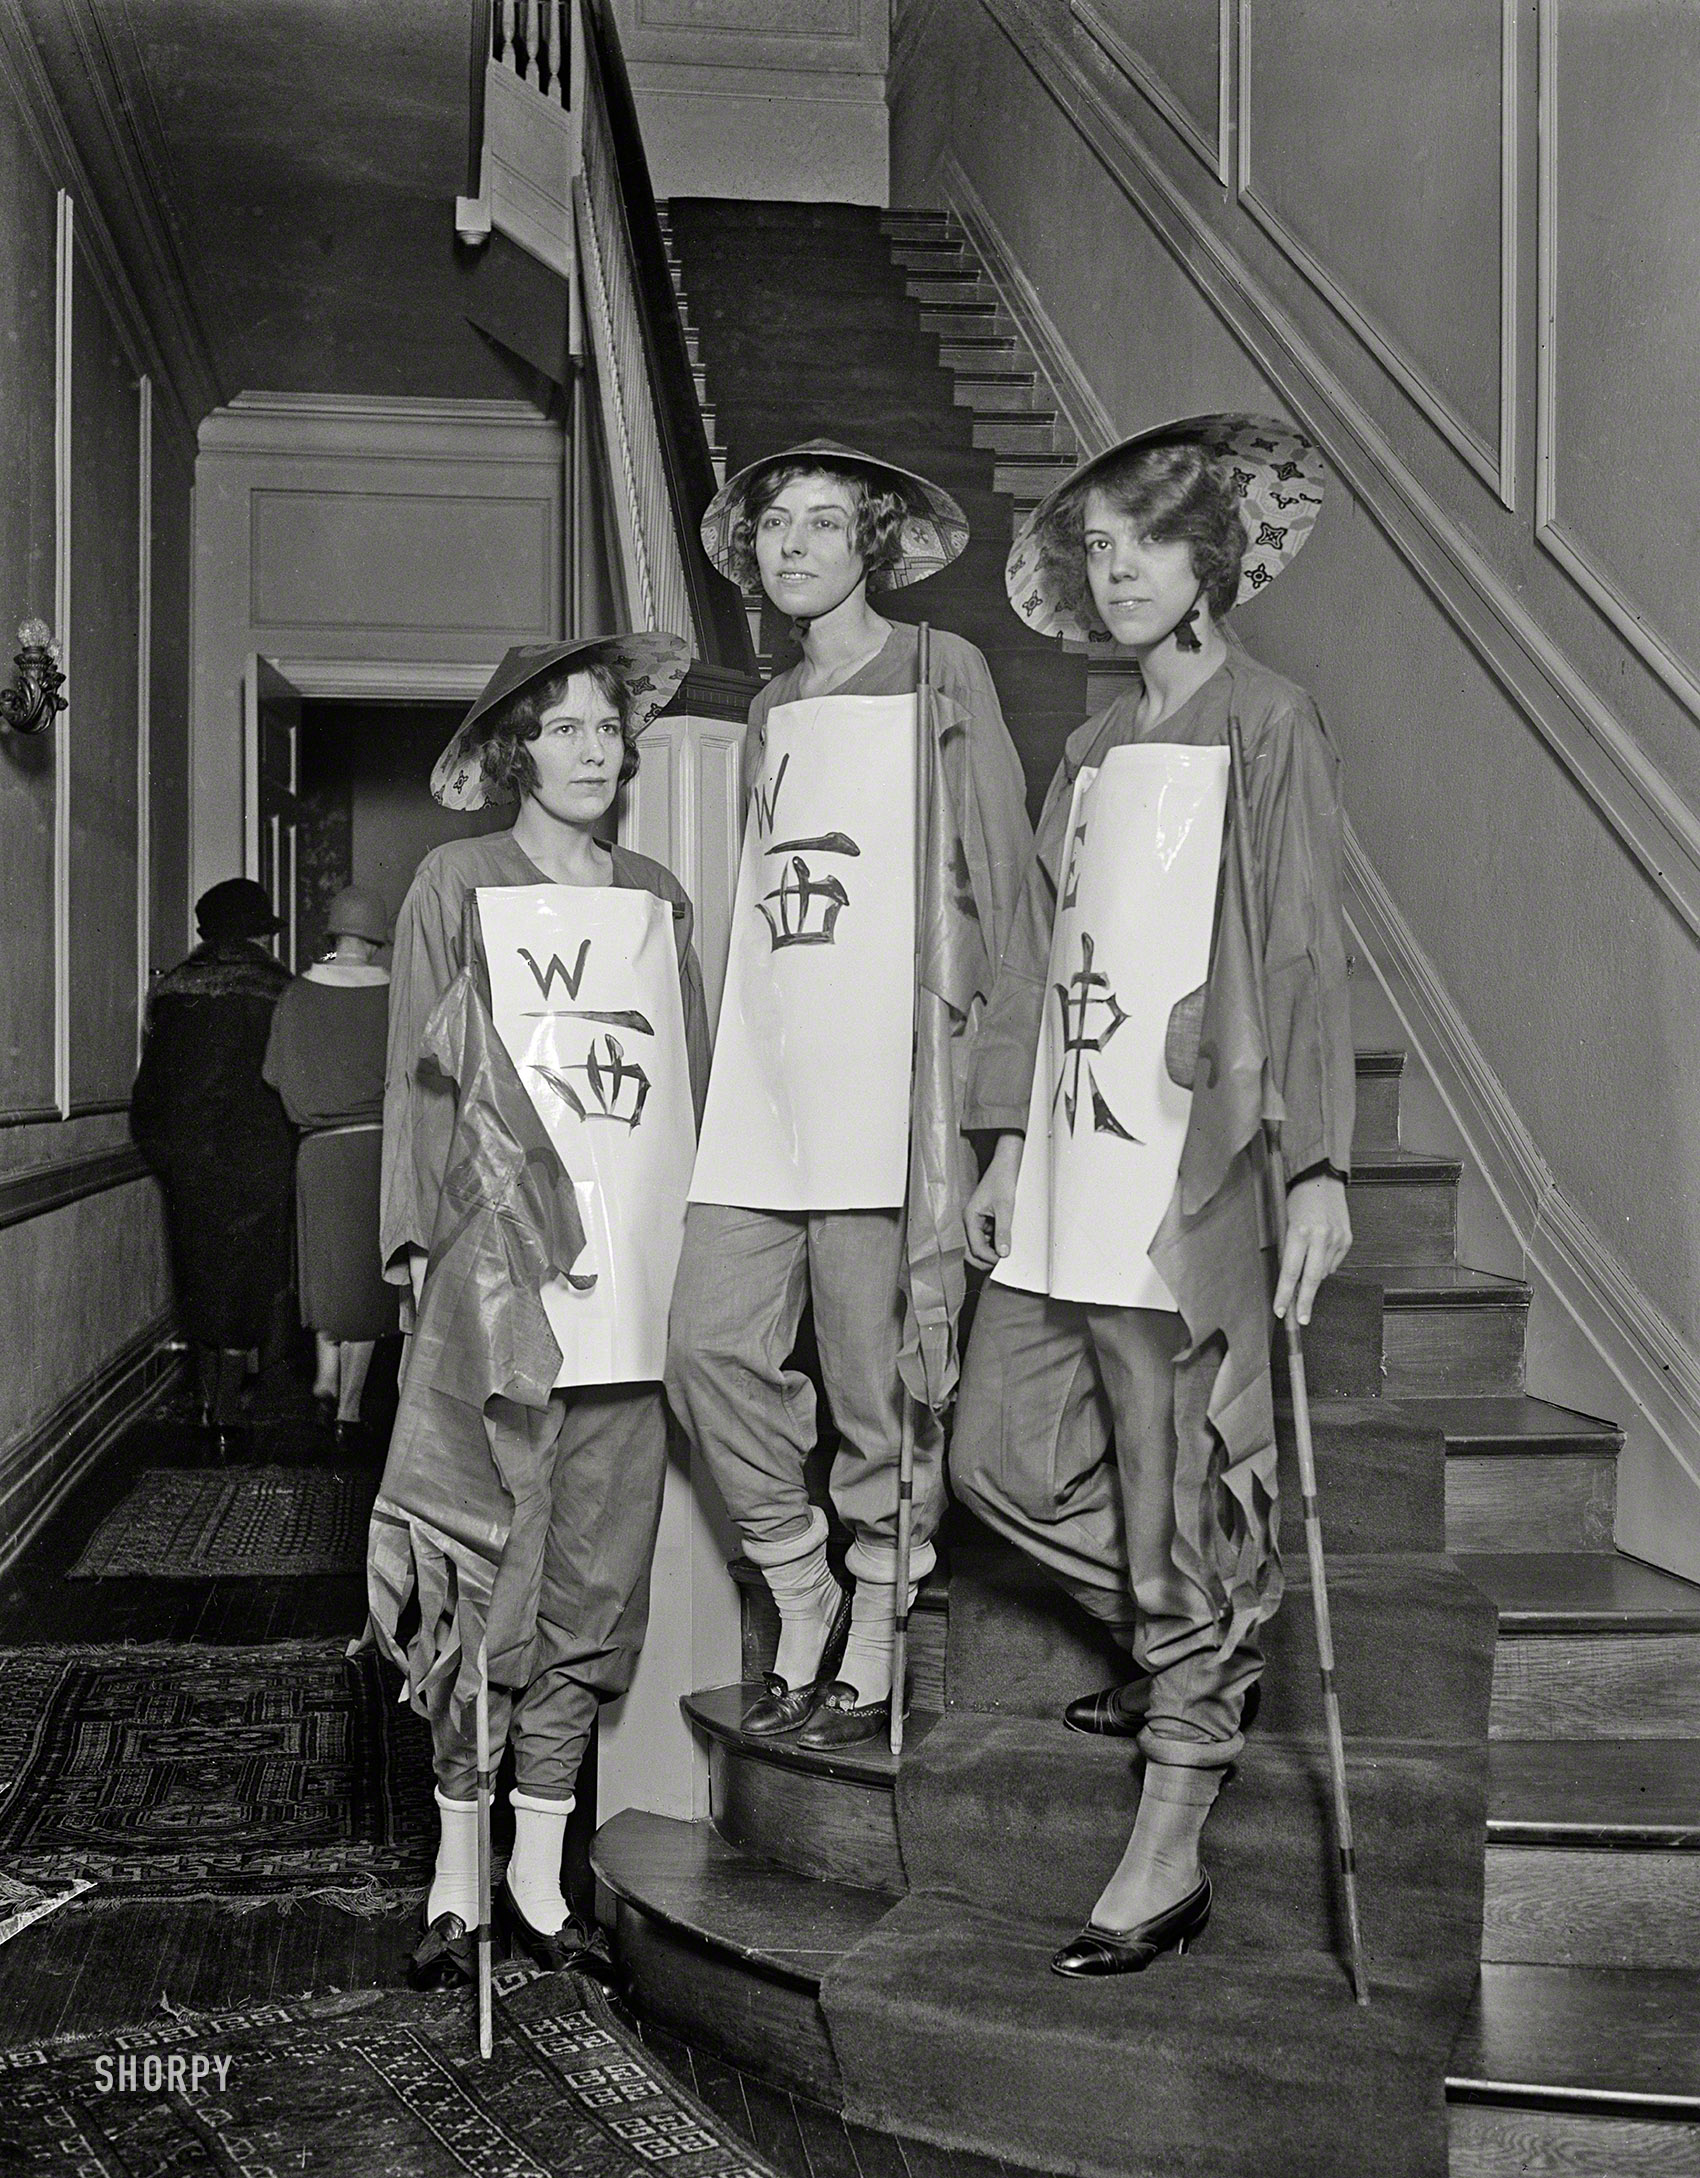 Mah Jong Game Fantasy

Colorful Chinese Legend Enacted
With Society Girls as Human Tiles.

Feb. 6, 1925. "Three Washington society buds in spectacle. The misses Beatrice McLean (left), debutante daughter of Capt. and Mrs. Ridley McLean; Helen Thompson; and Eugenie LeJeune, daughter of General and Mrs. John A. LeJeune; all members of the 'Group of the Winds' who will take part in the human 'Game of Mah Jongg, The Great Dramatic Spectacle,' to be presented for the first time in the Washington Auditorium under the auspices of the Belleau Wood Memorial Association." Harris & Ewing Collection glass negative. View full size.